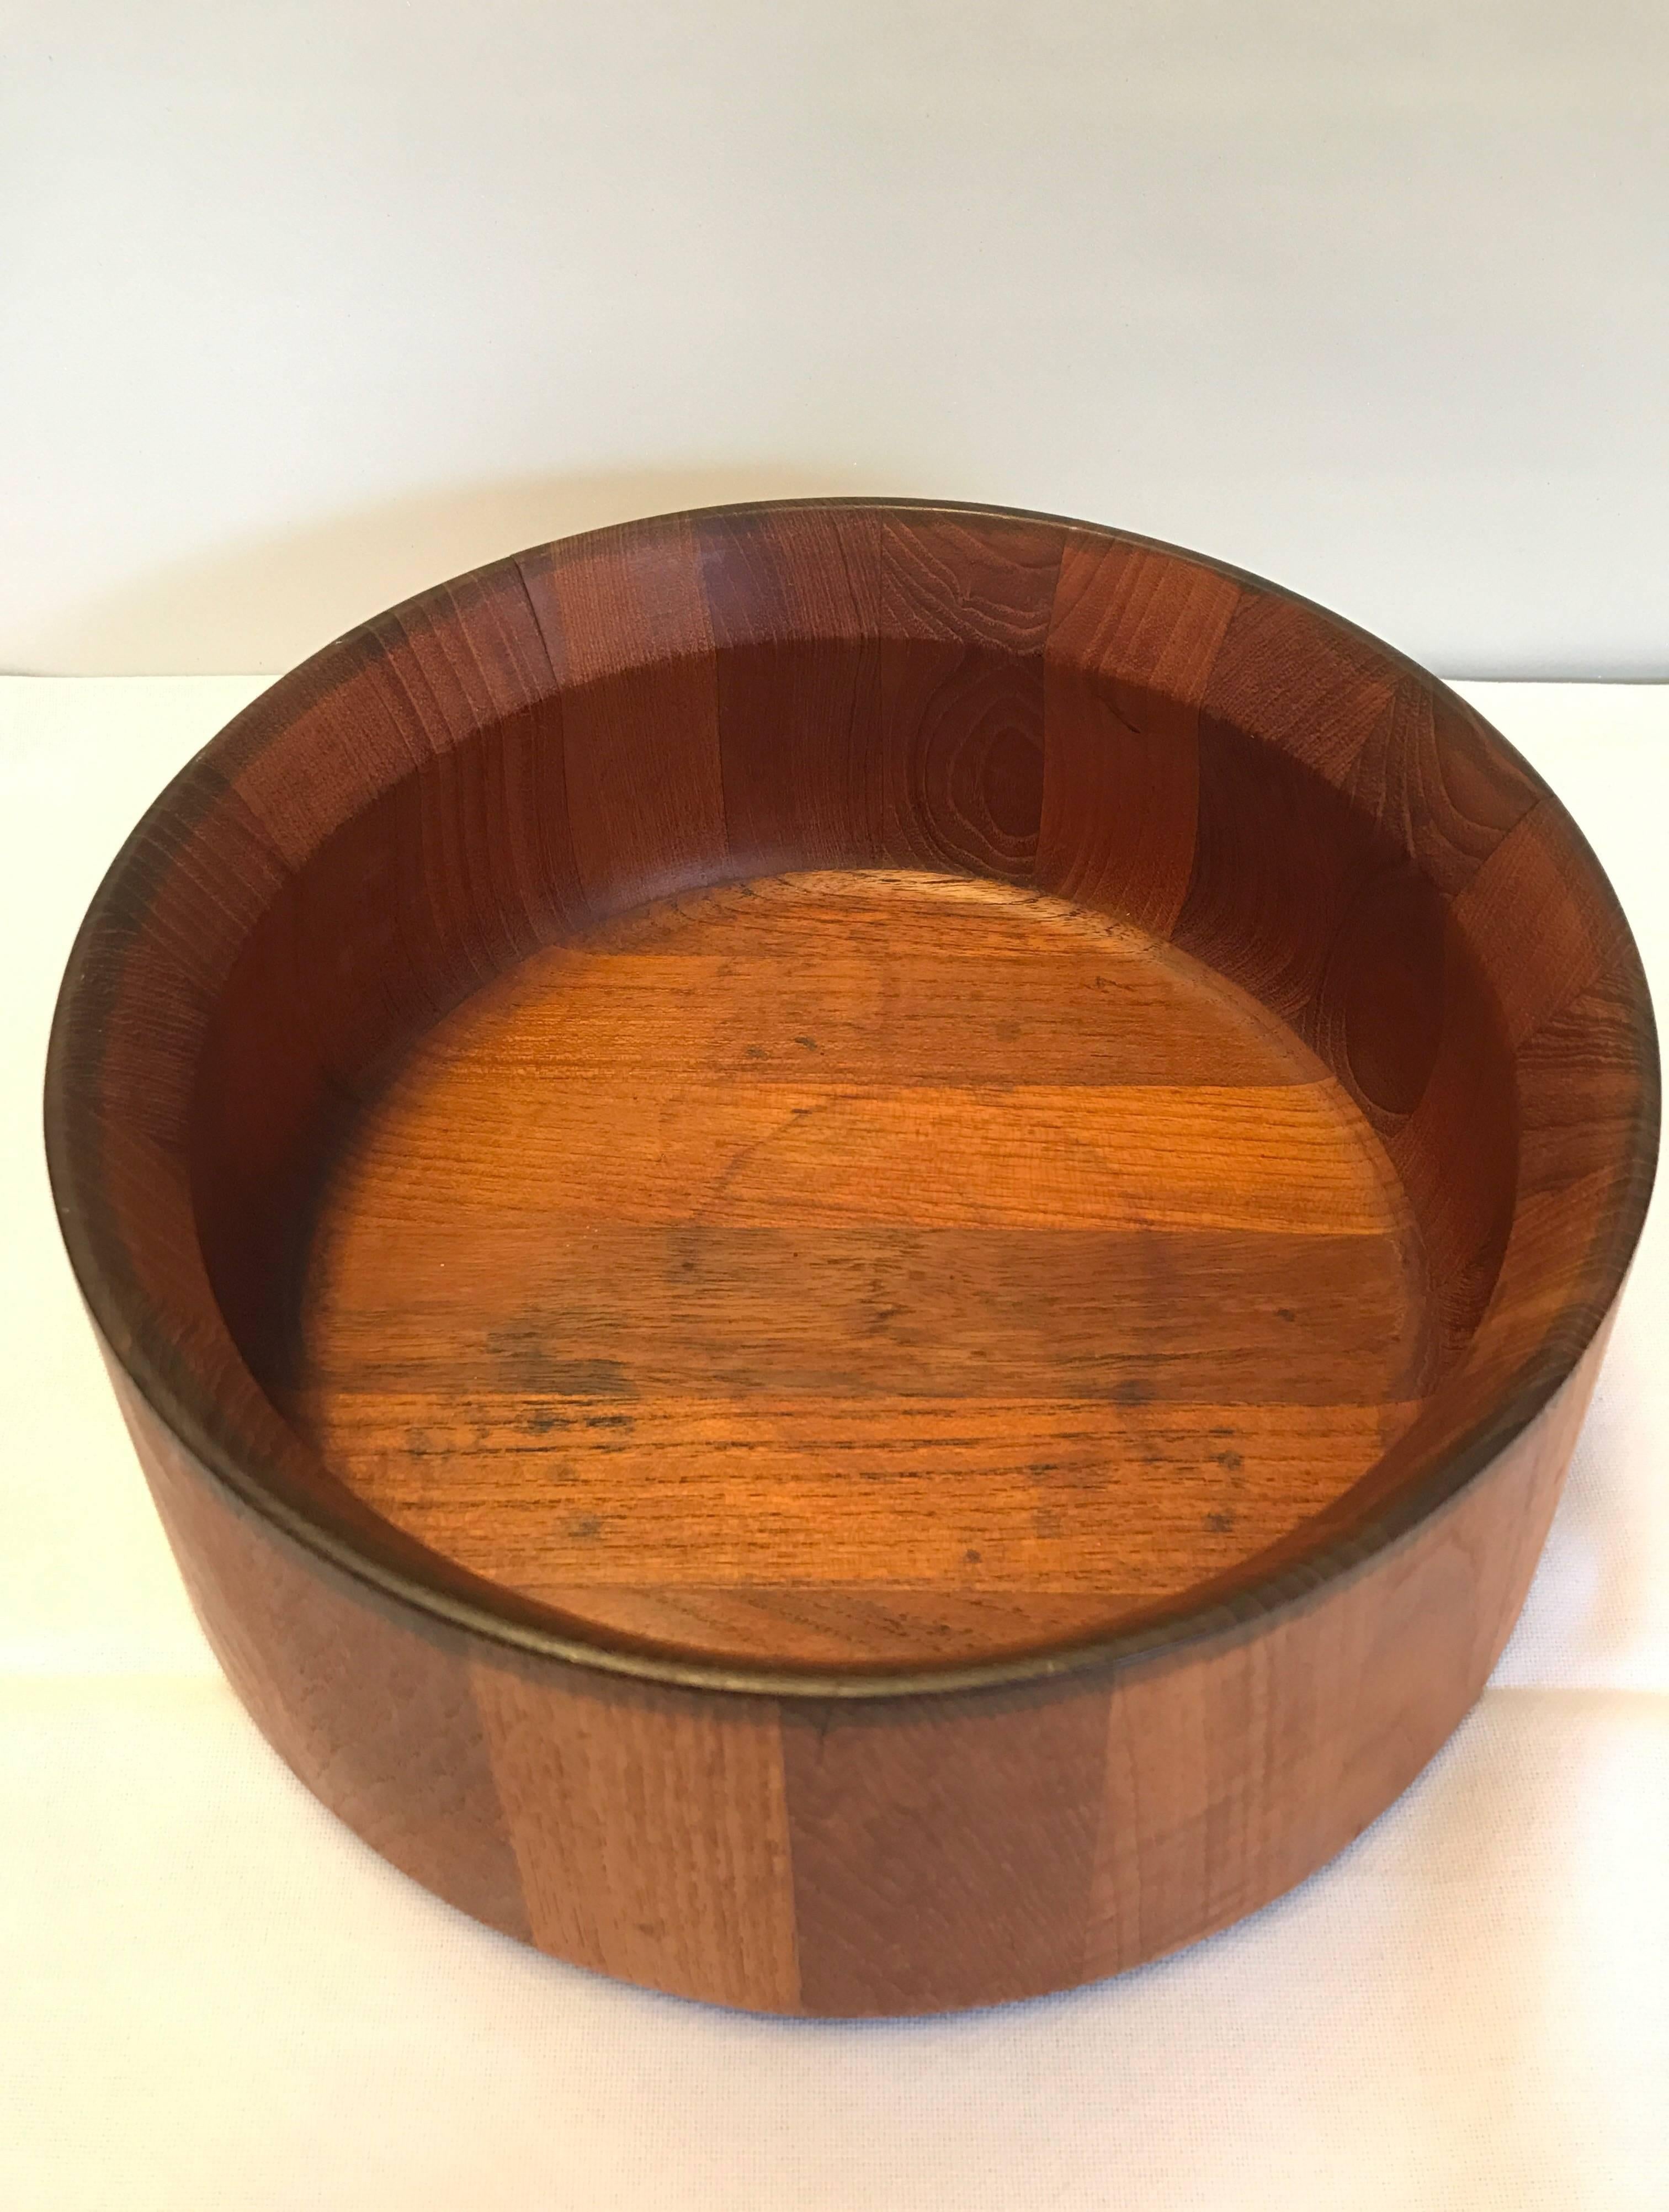 Large teak salad bowl from Jens H. Quistgaard, 1960s, Denmark. Measures: Diameter 29 cm, height 11 cm. in very good condition.